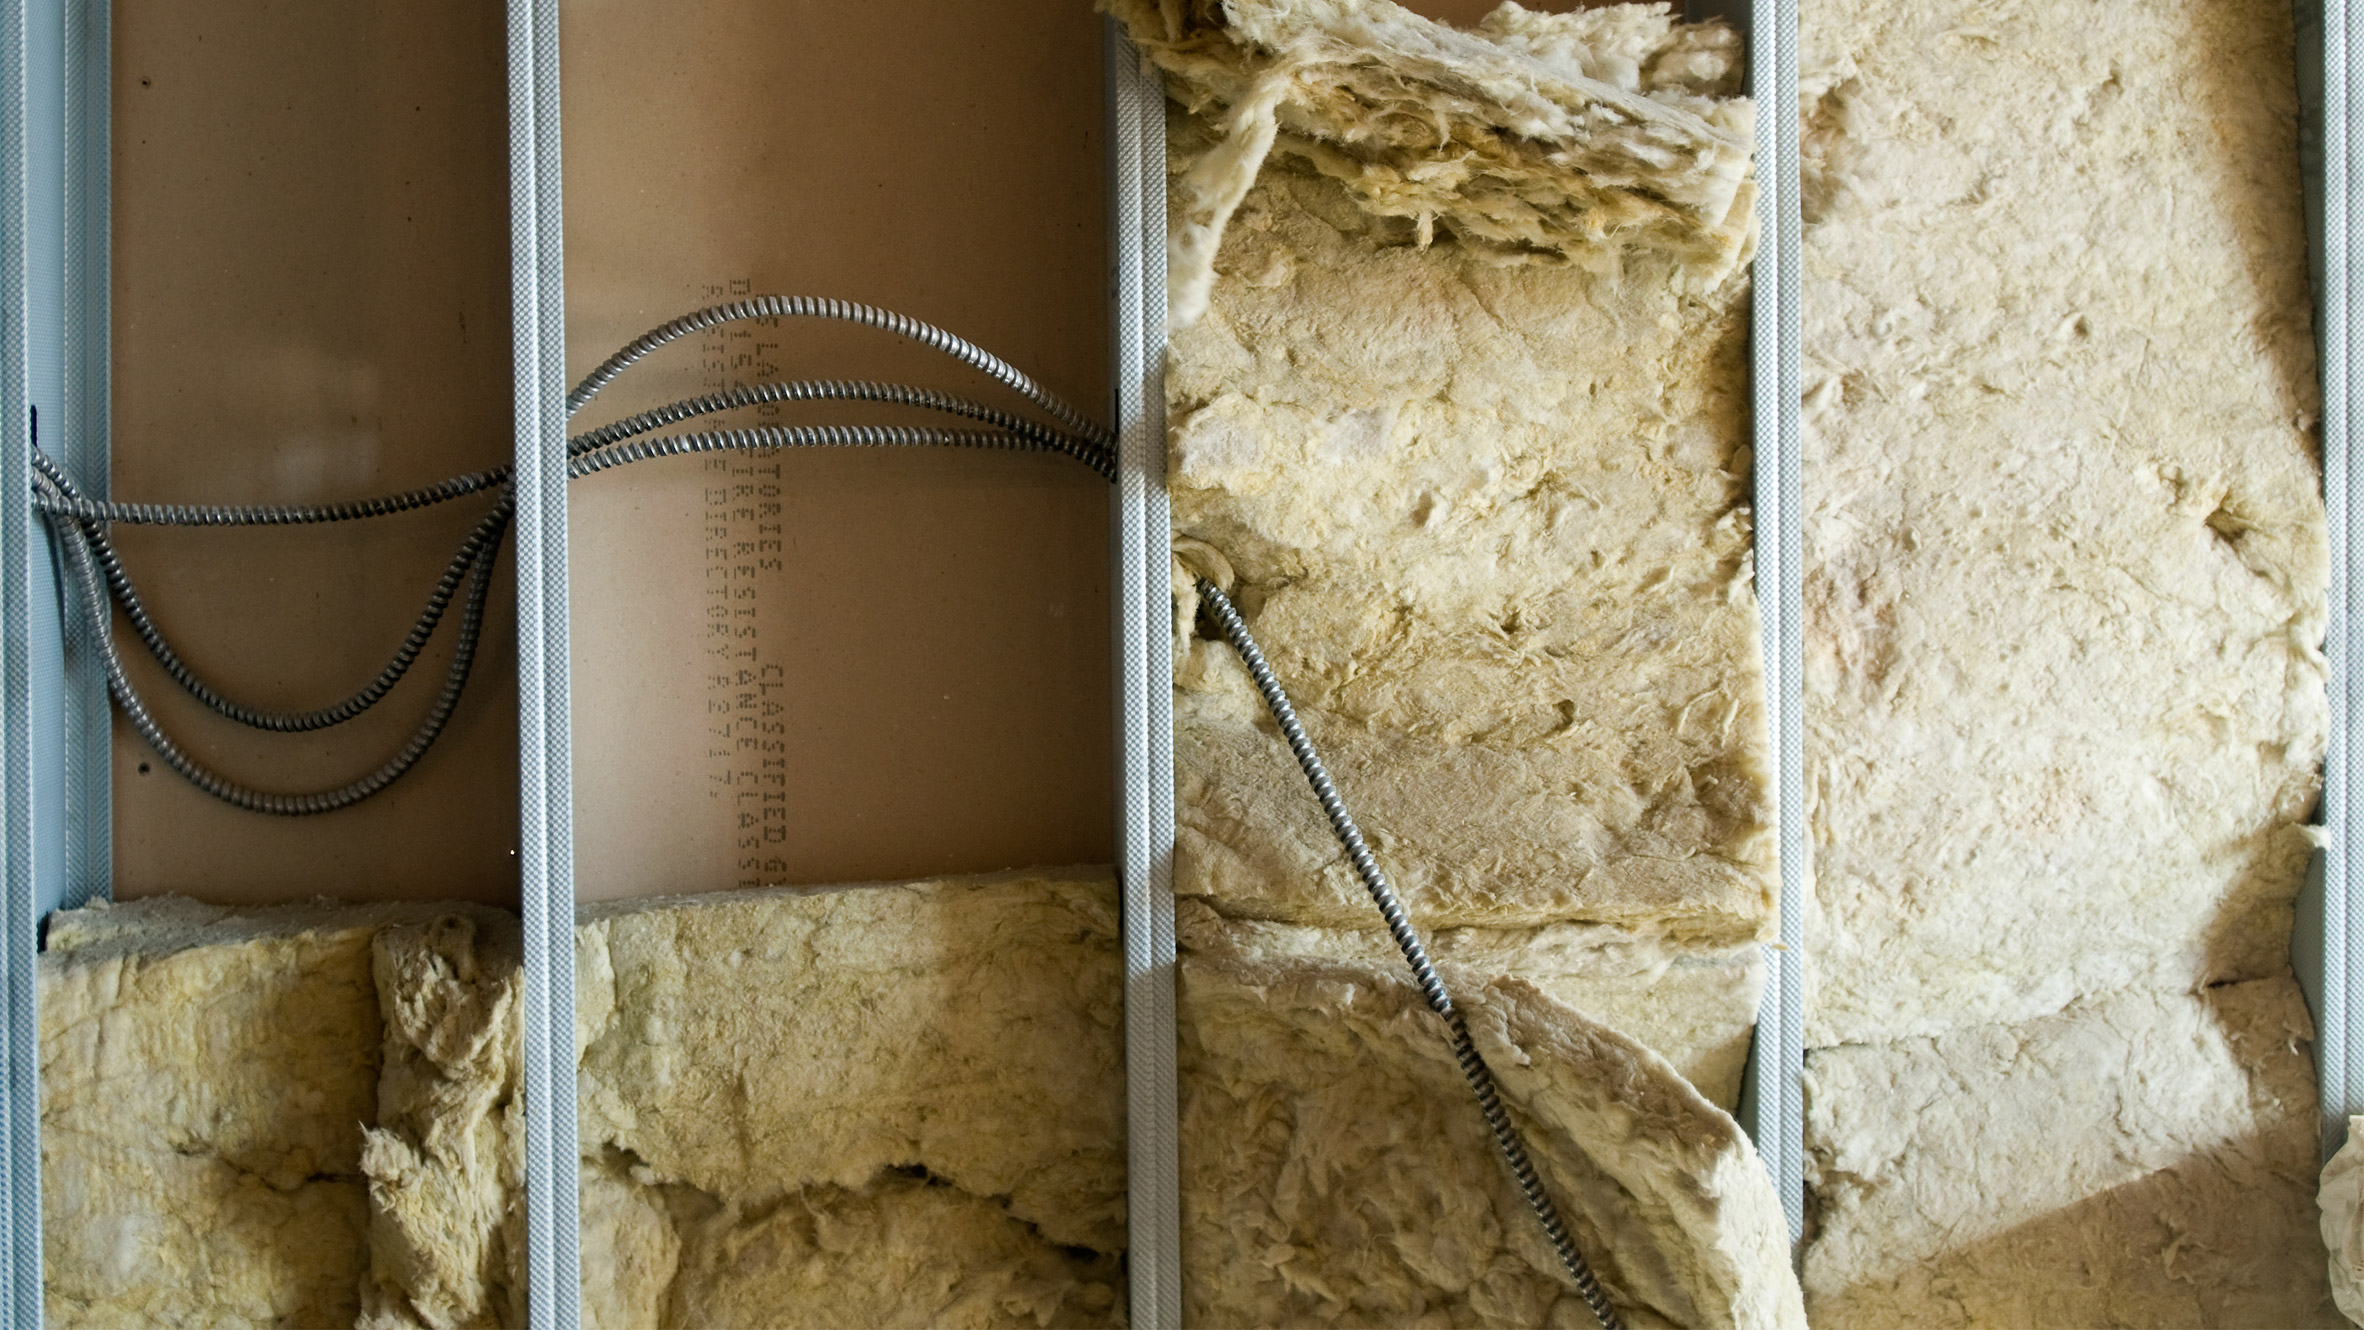 Picture of insulation in a building framework by Jupiter Images illustrating story about Cambridge insulation study